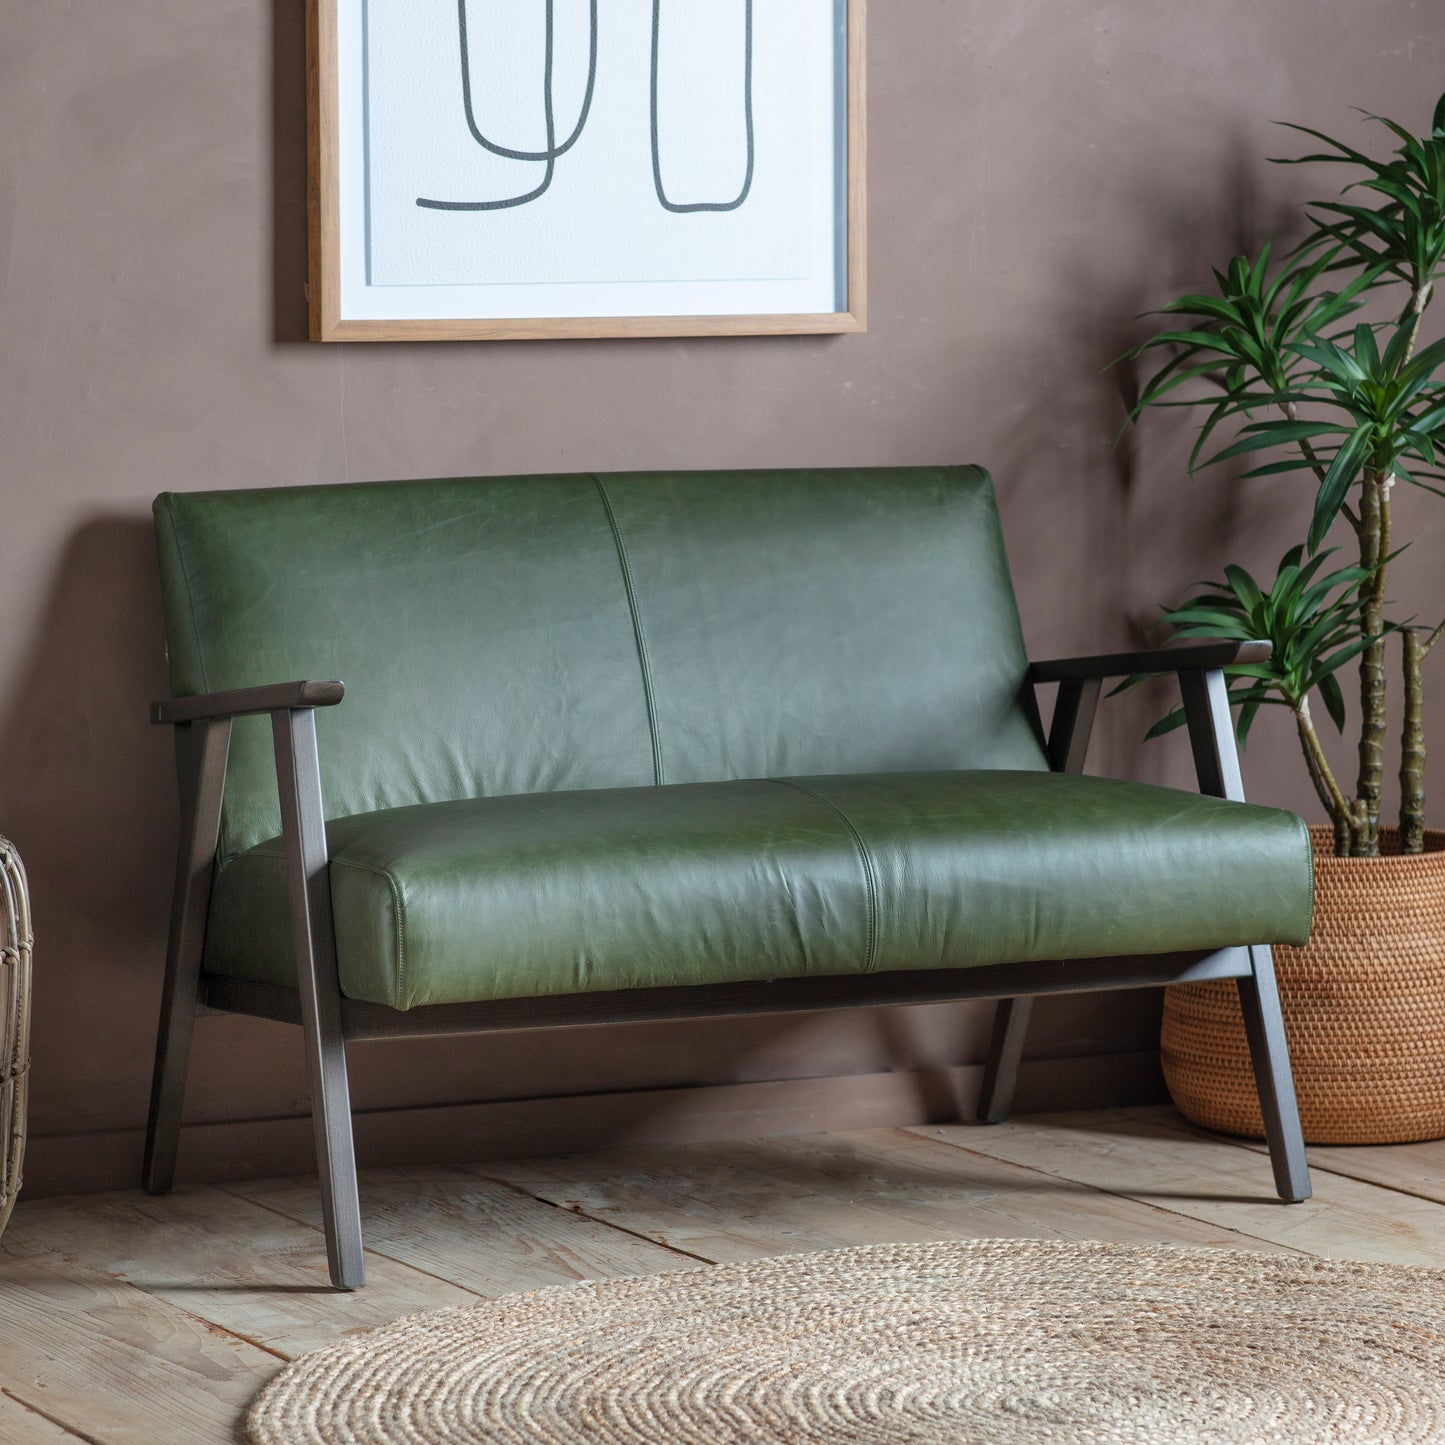 A Neyland 2 Seater Sofa Heritage Green Leather from Kikiathome.co.uk enhancing interior decor in front of a wall.